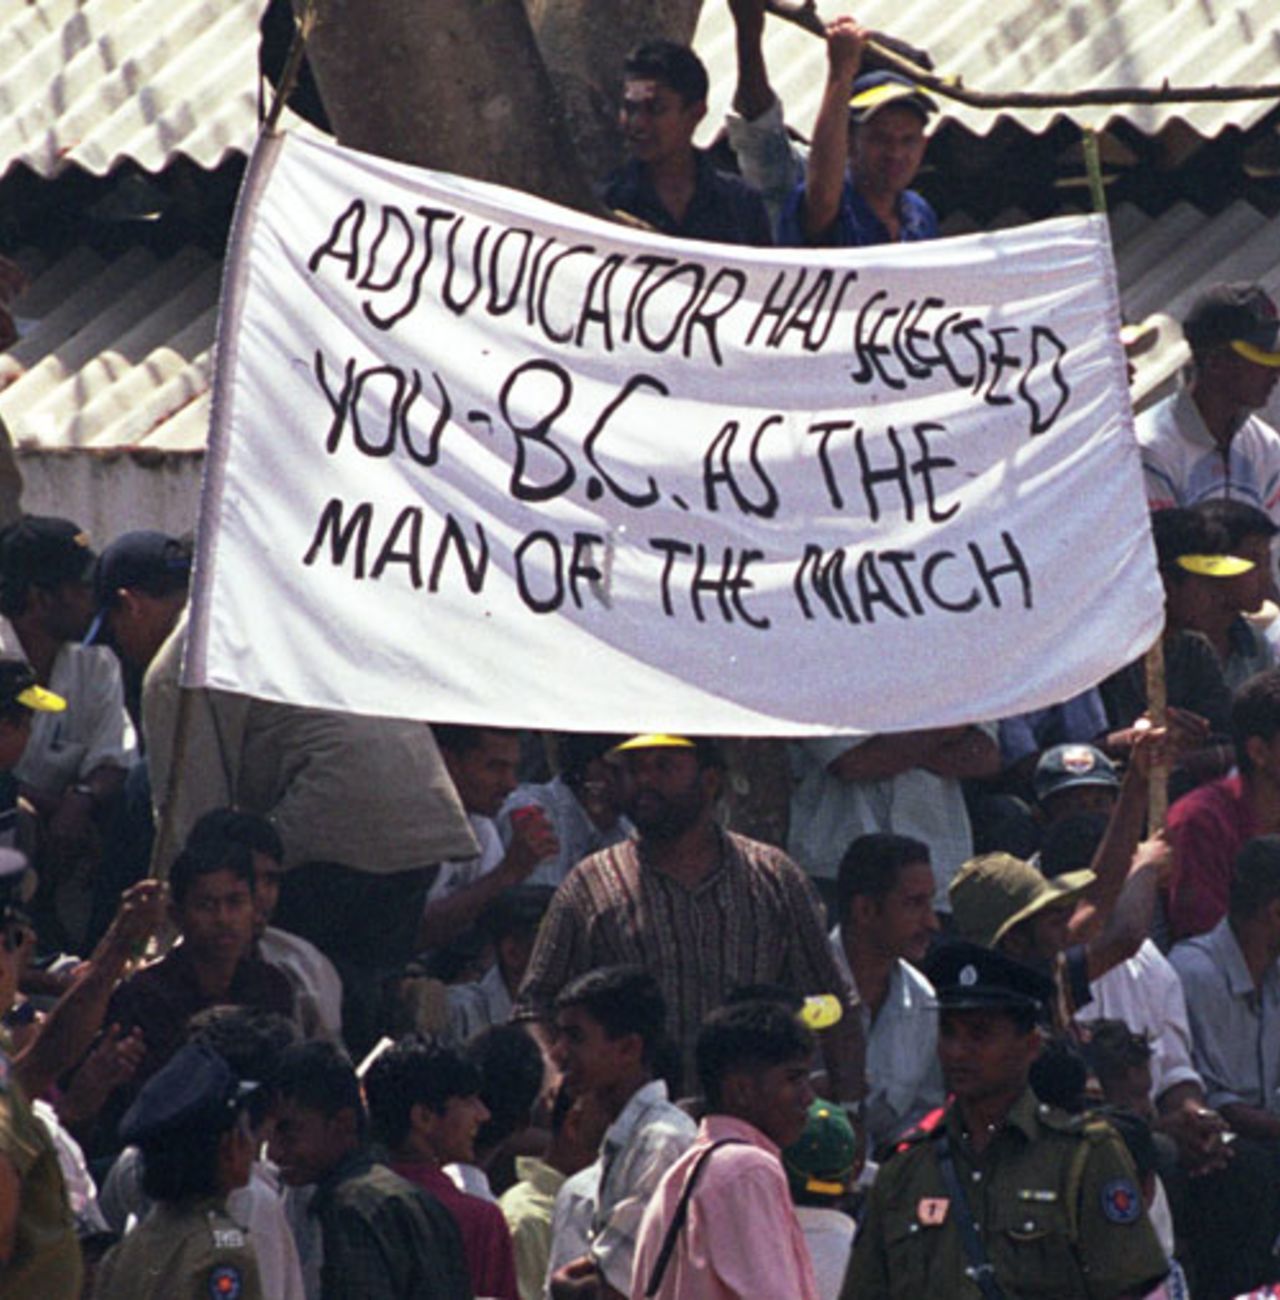 Sri Lankan supporters protest against BC Cooray's umpiring, Sri Lanka v England 2nd Test, Kandy, March 10, 2001